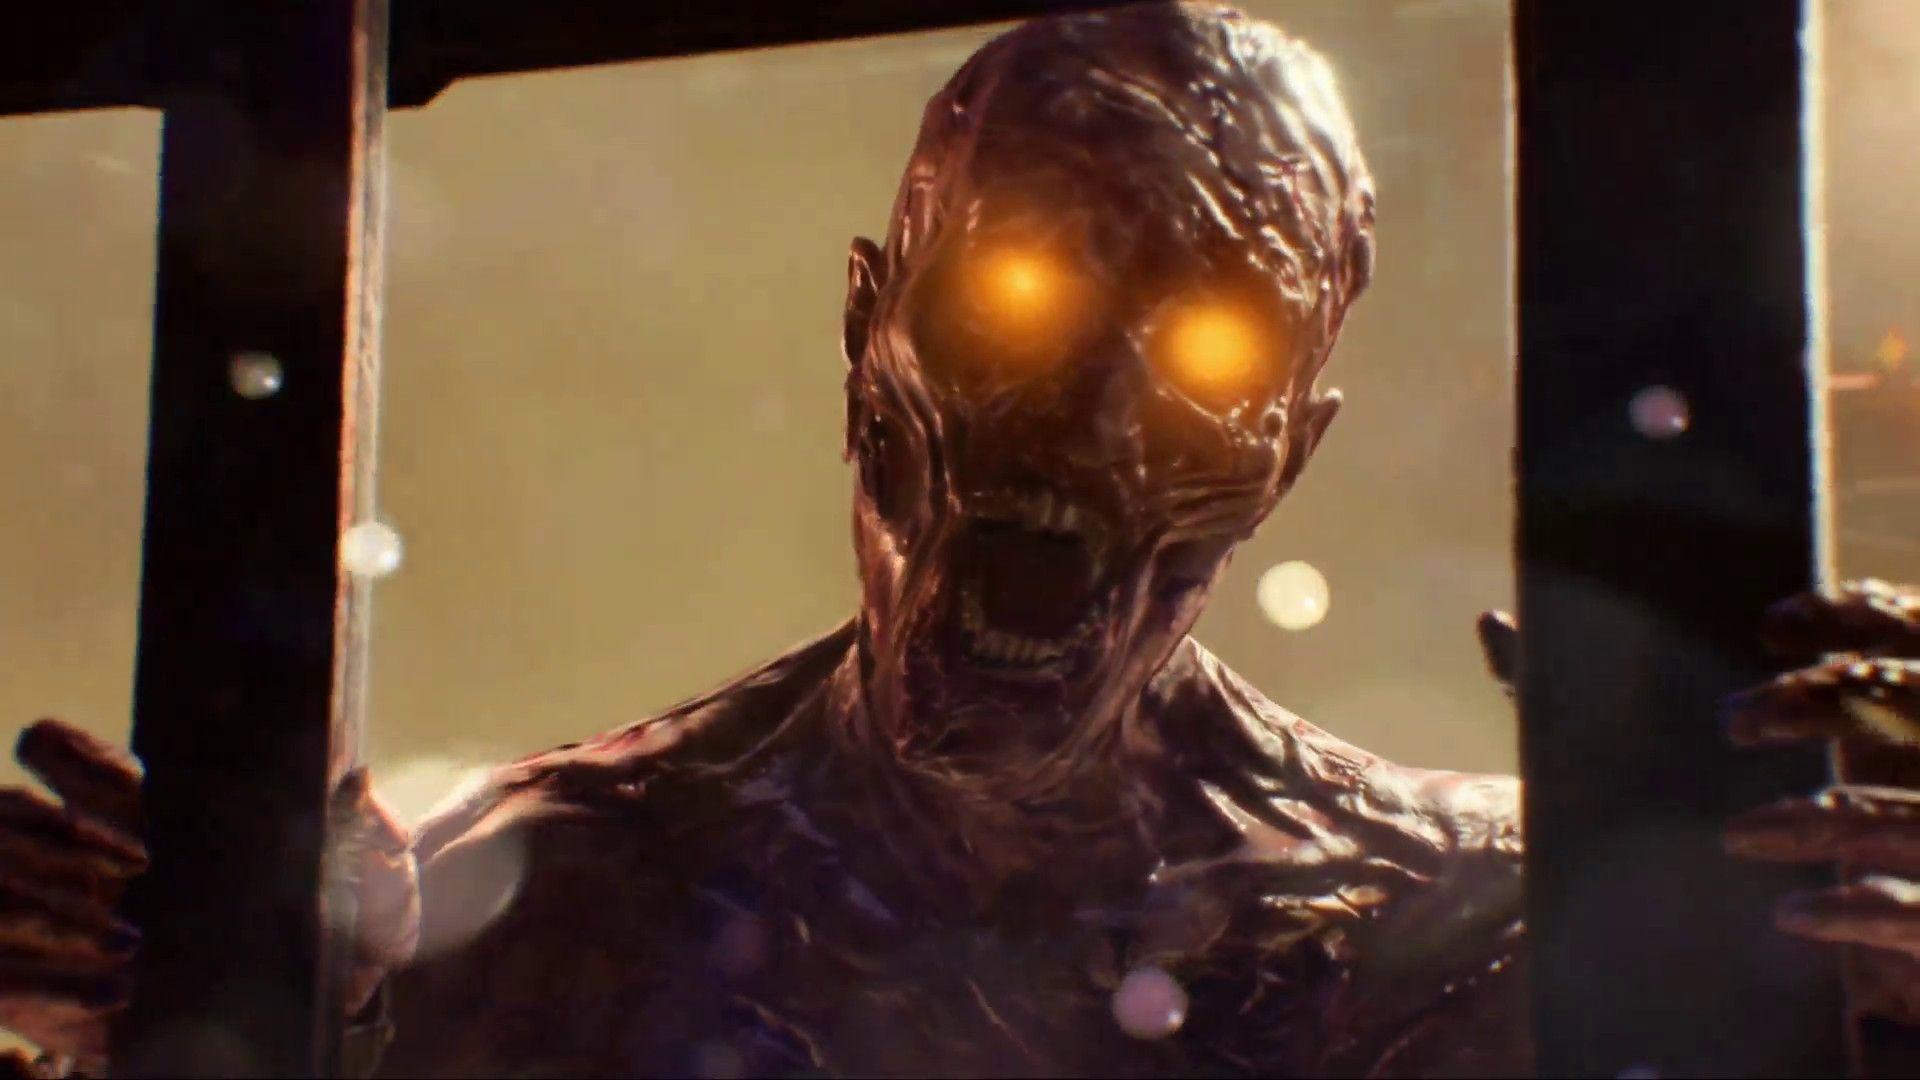 Call of Duty: Black Ops 4's Zombies mode first details